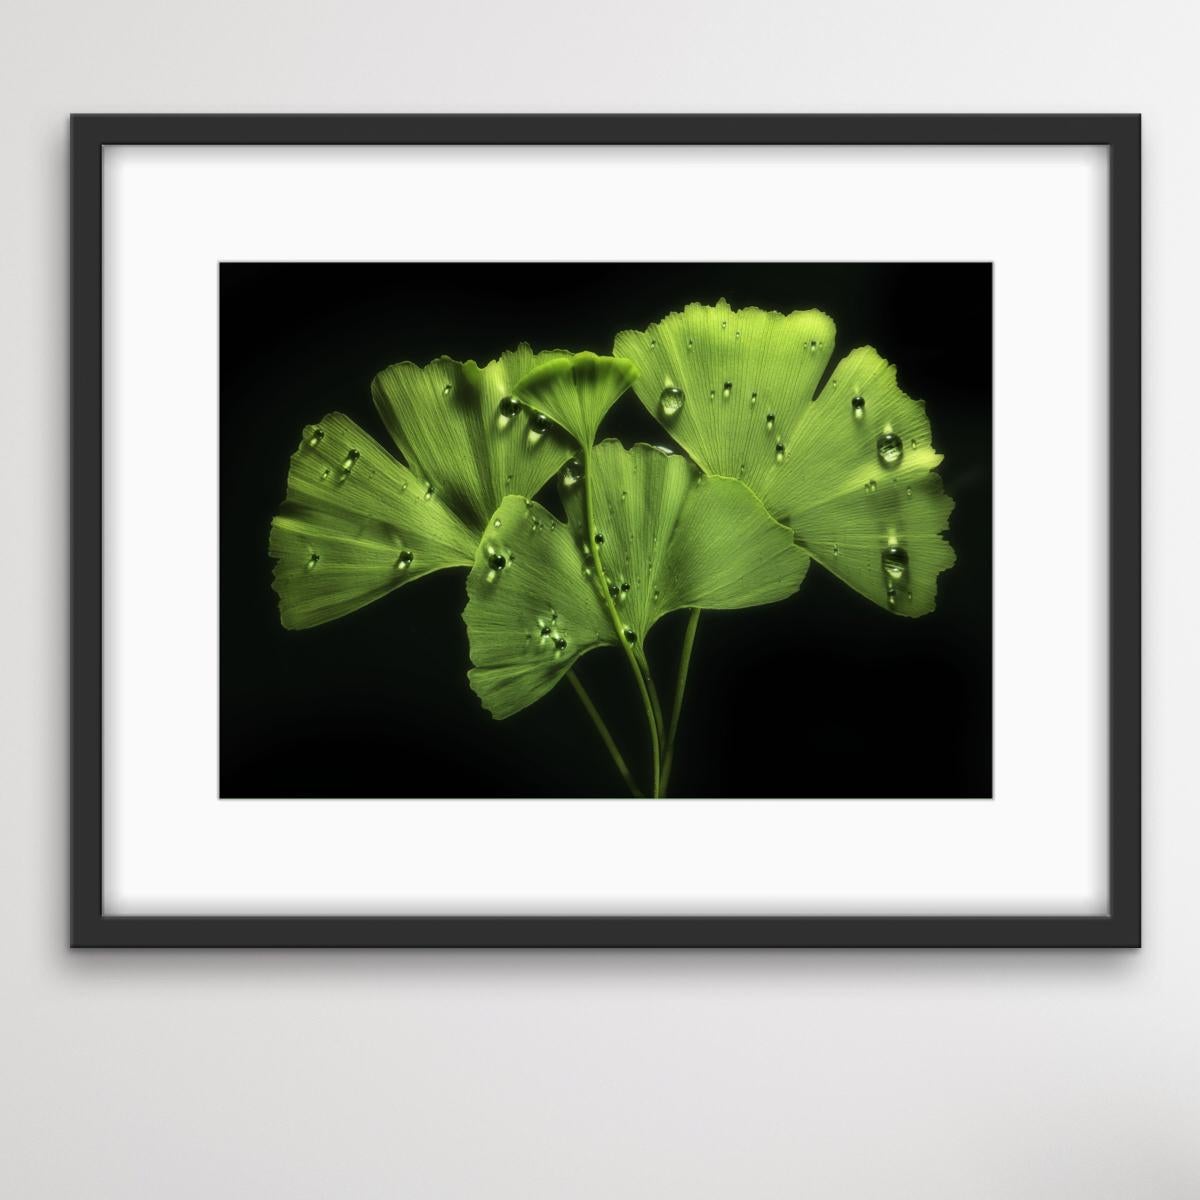 Ginko Biloba No. 1, floral photography, limited edition print, green art For Sale 1